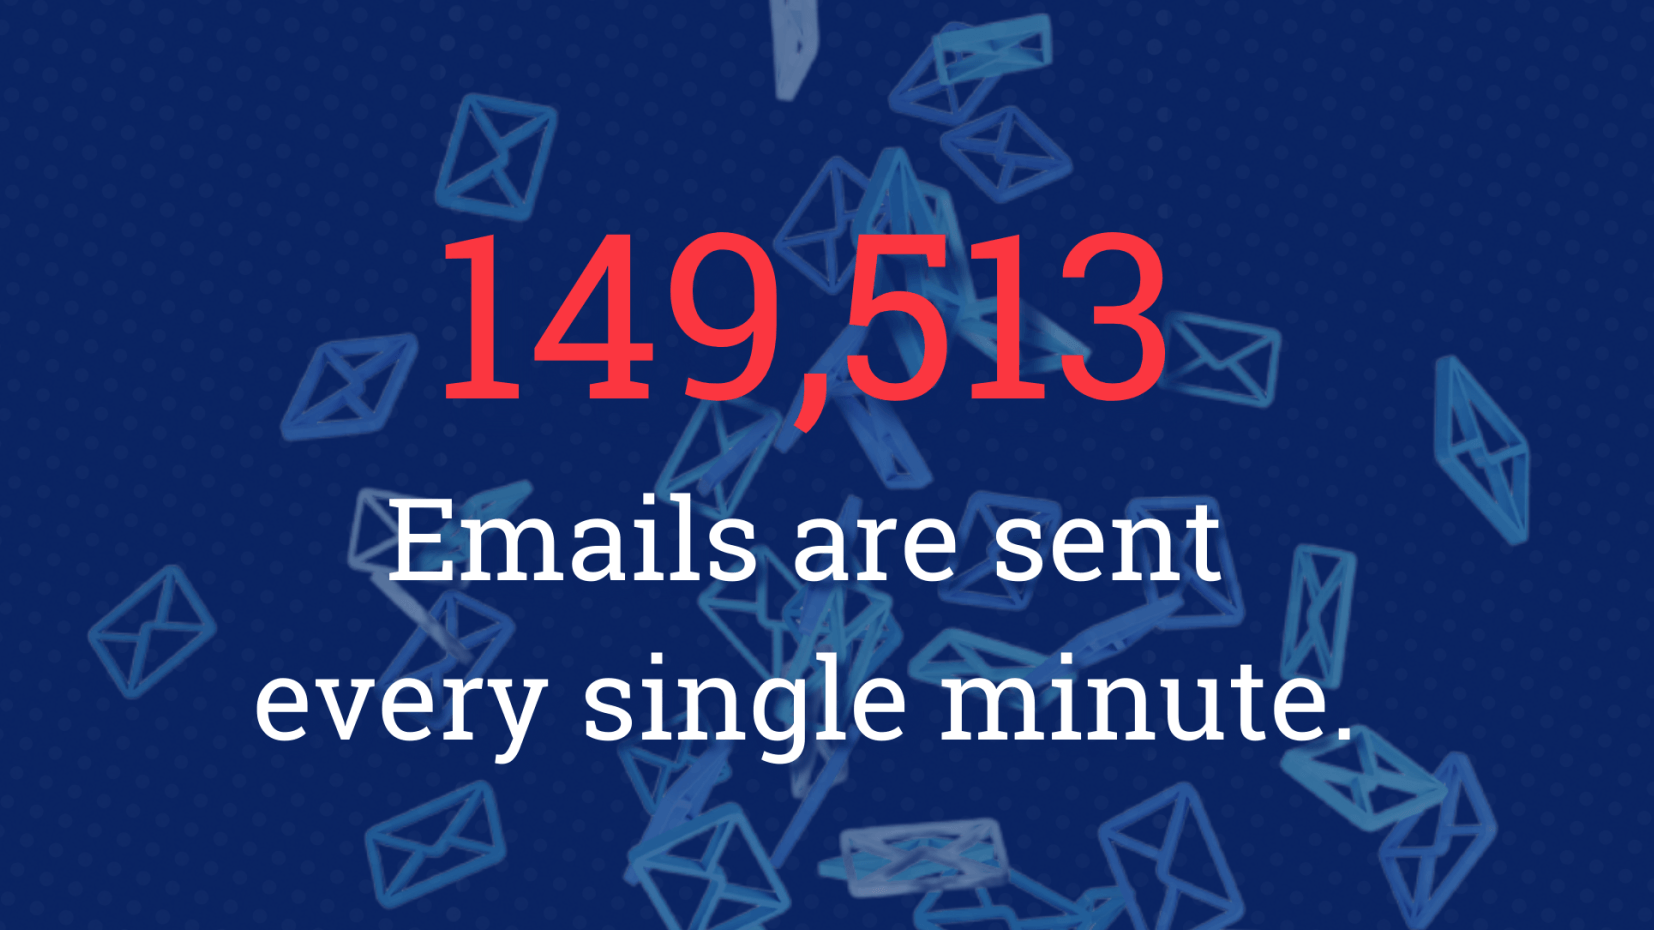 a poster that says 149,513 emails are sent every single minute